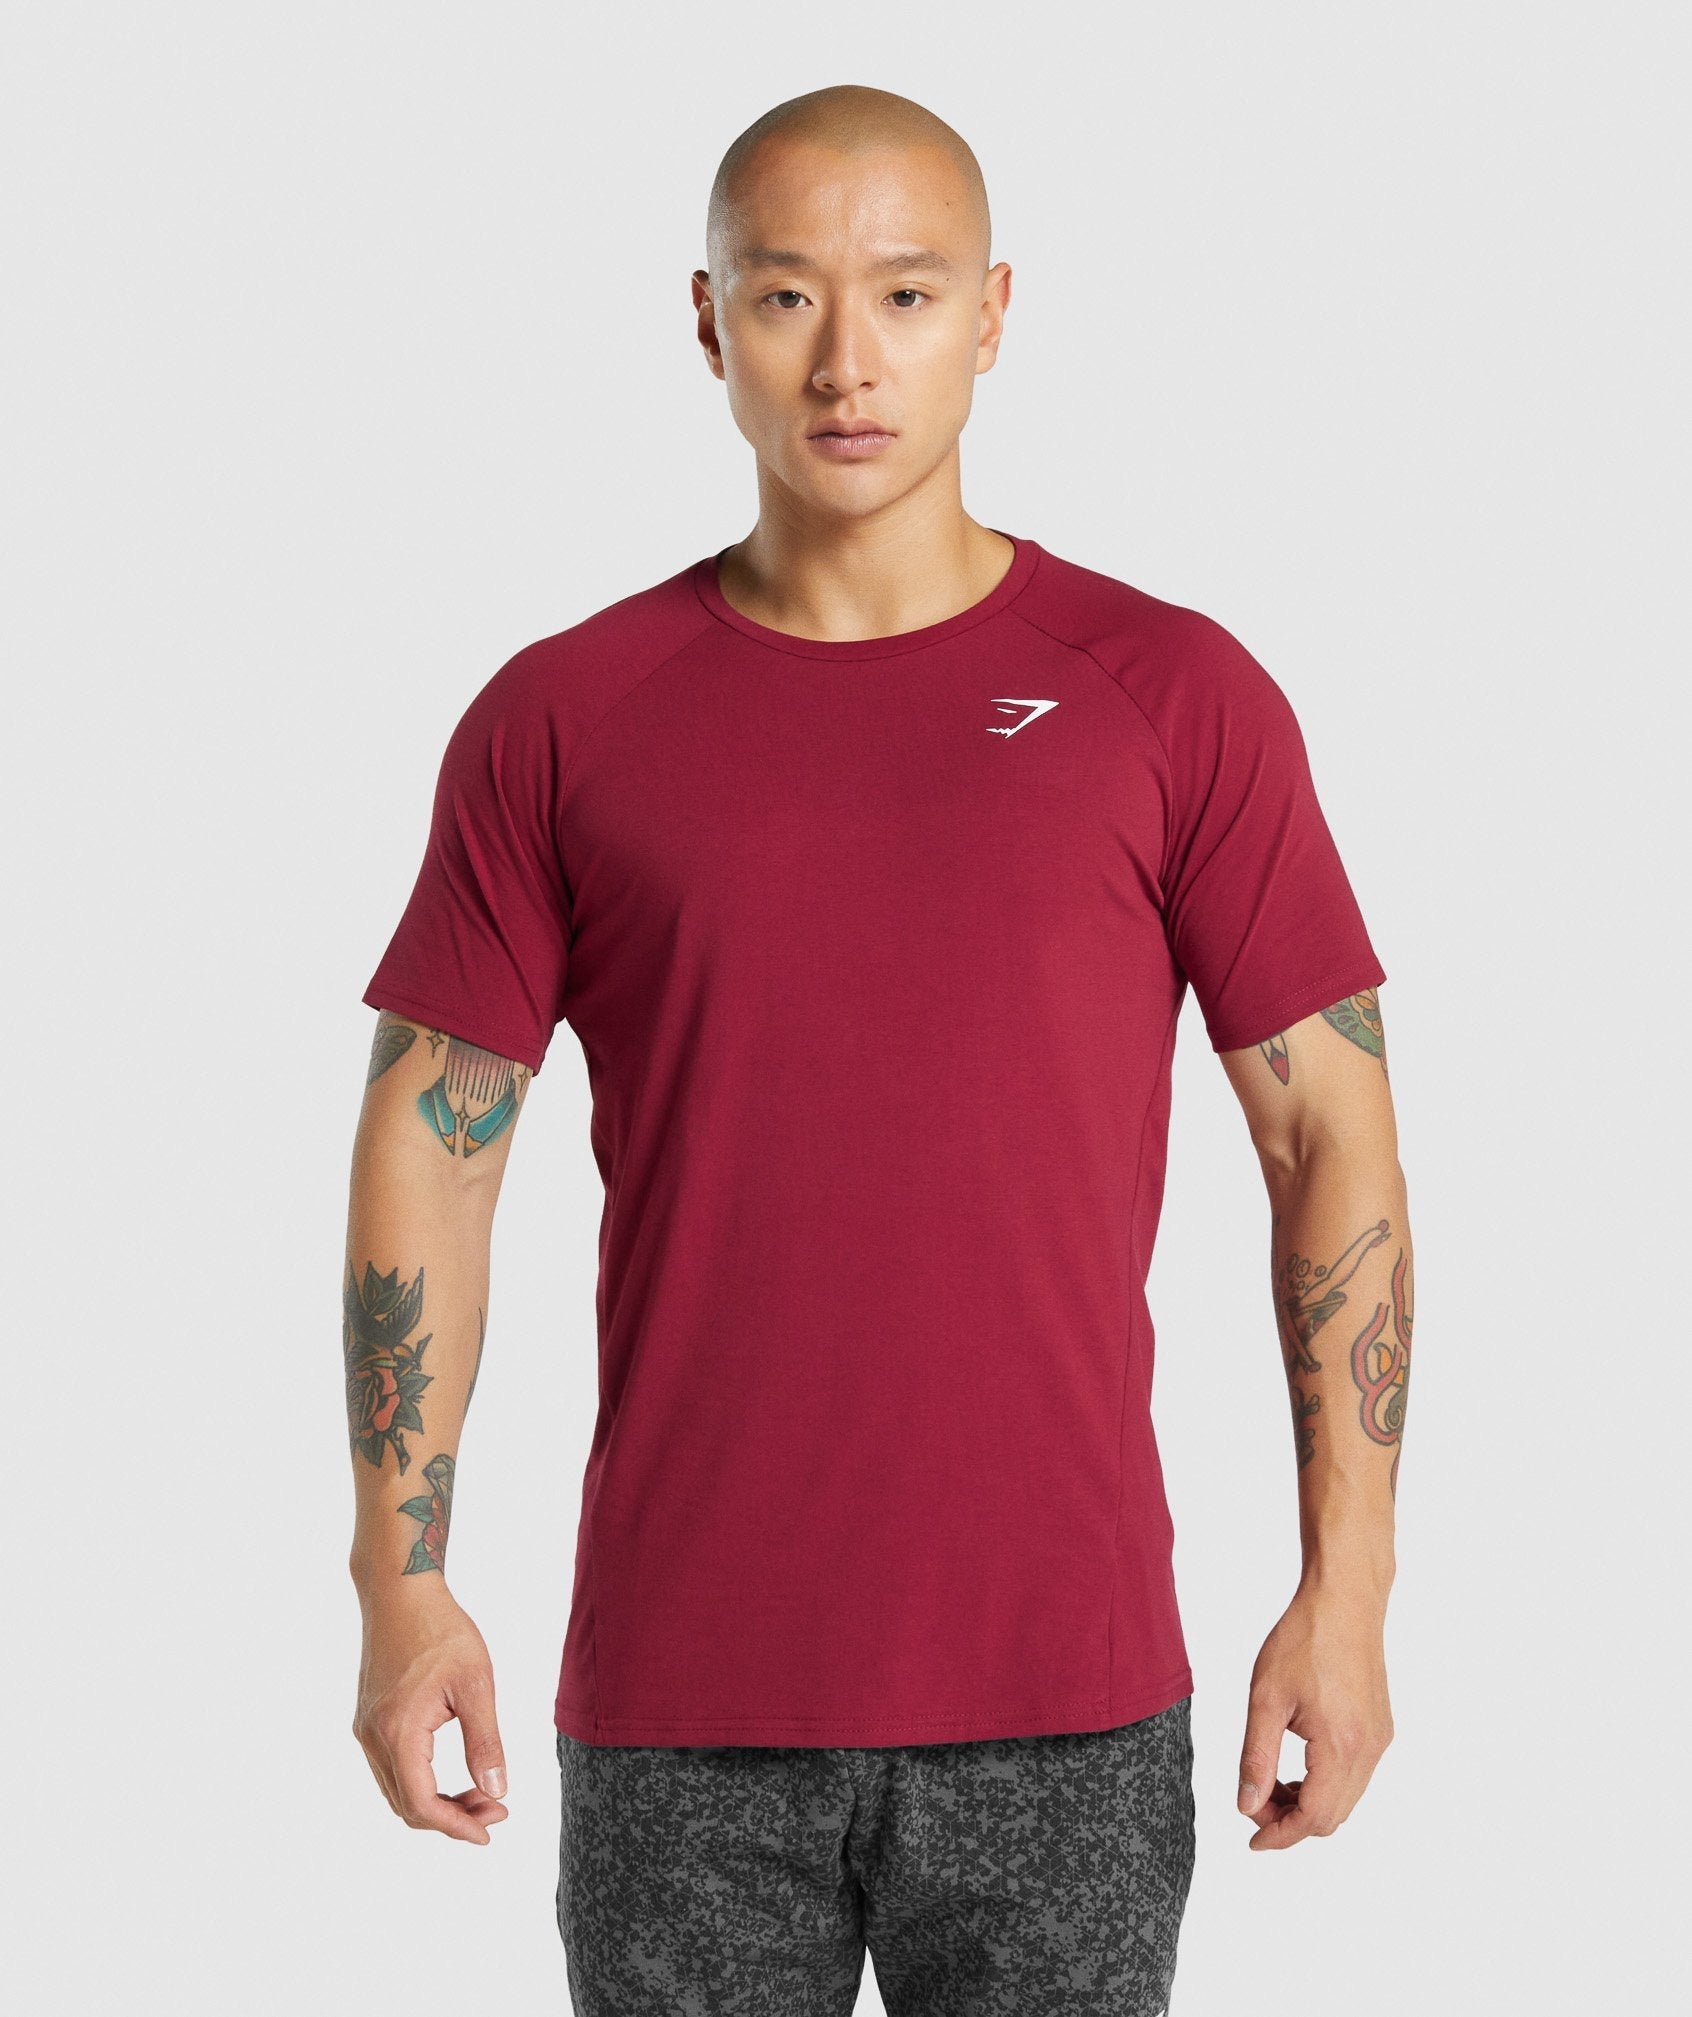 Gymshark Men's Size XL Red Cotton Athletic Graphic Logo T-Shirt - Spellout